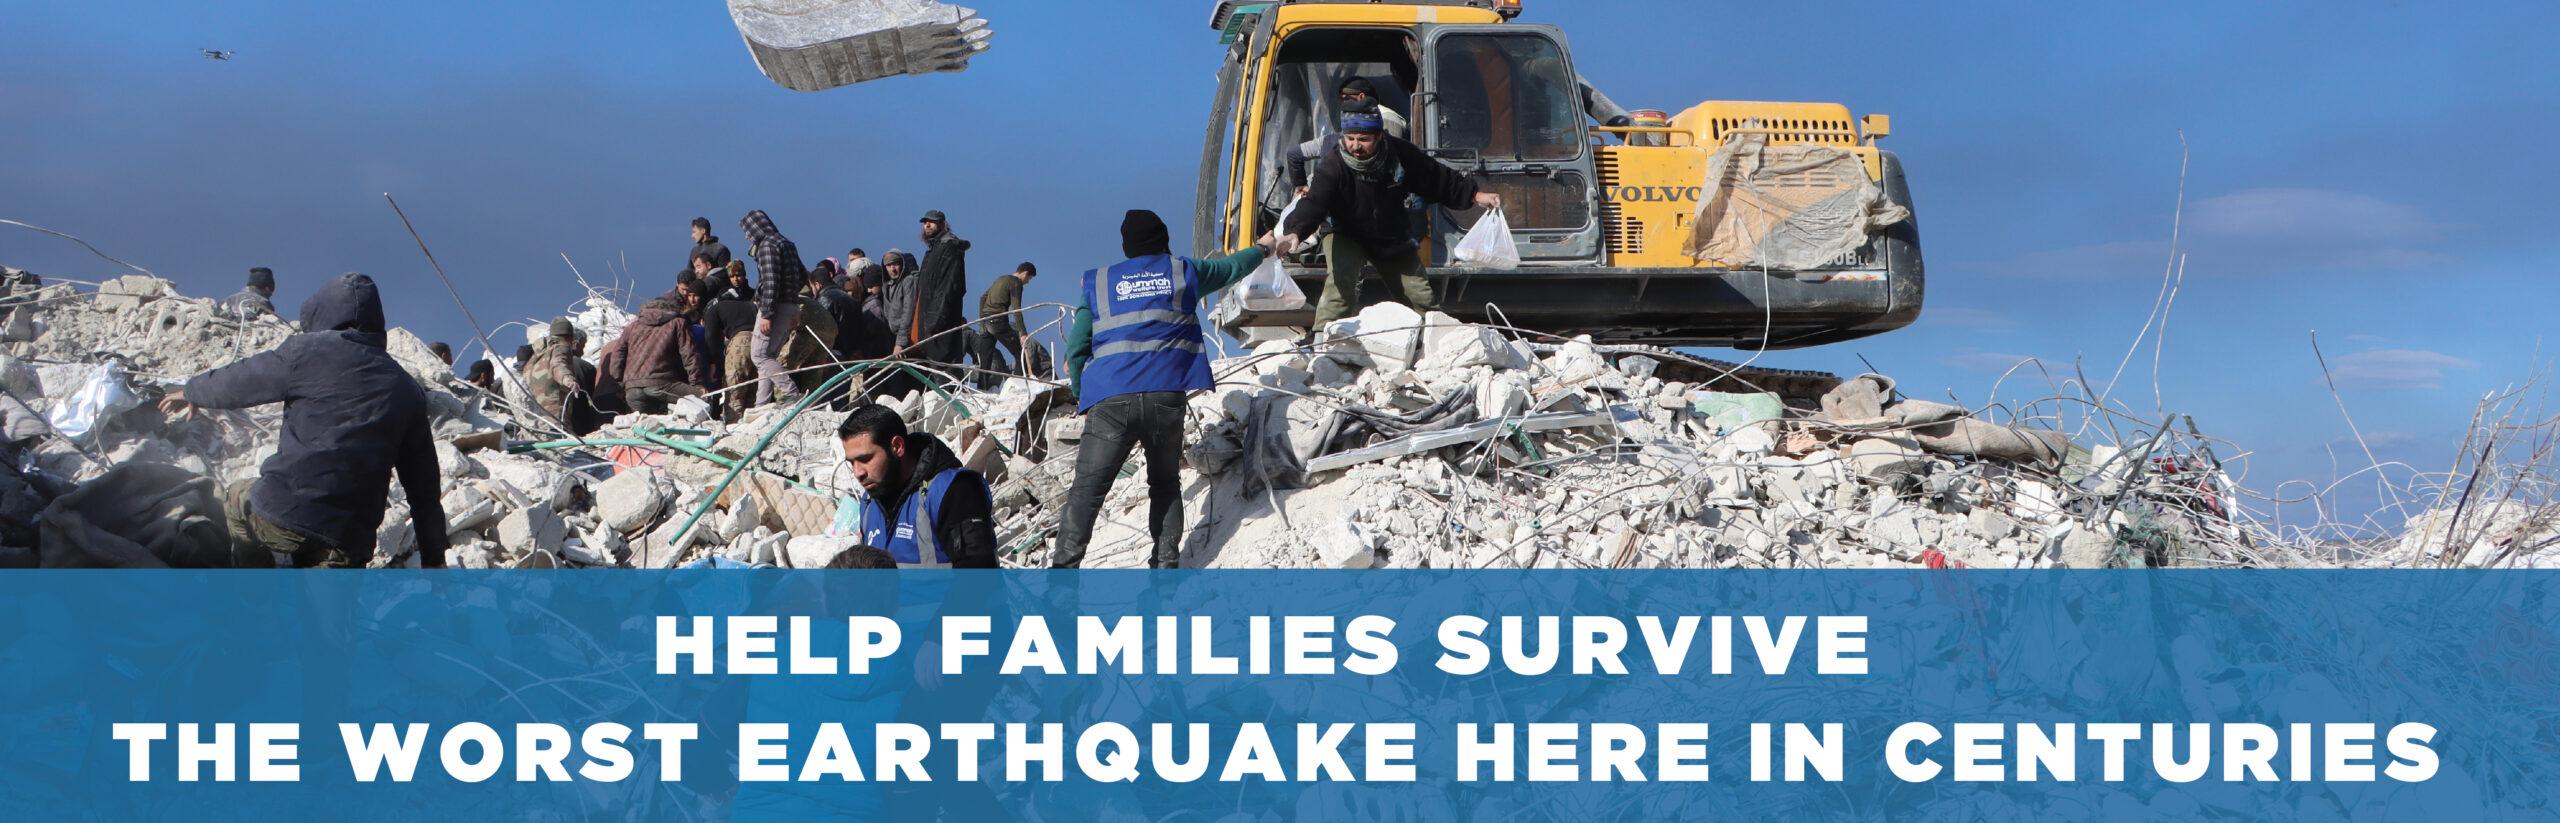 Help Families Survive the Worst Earthquake in Centuries